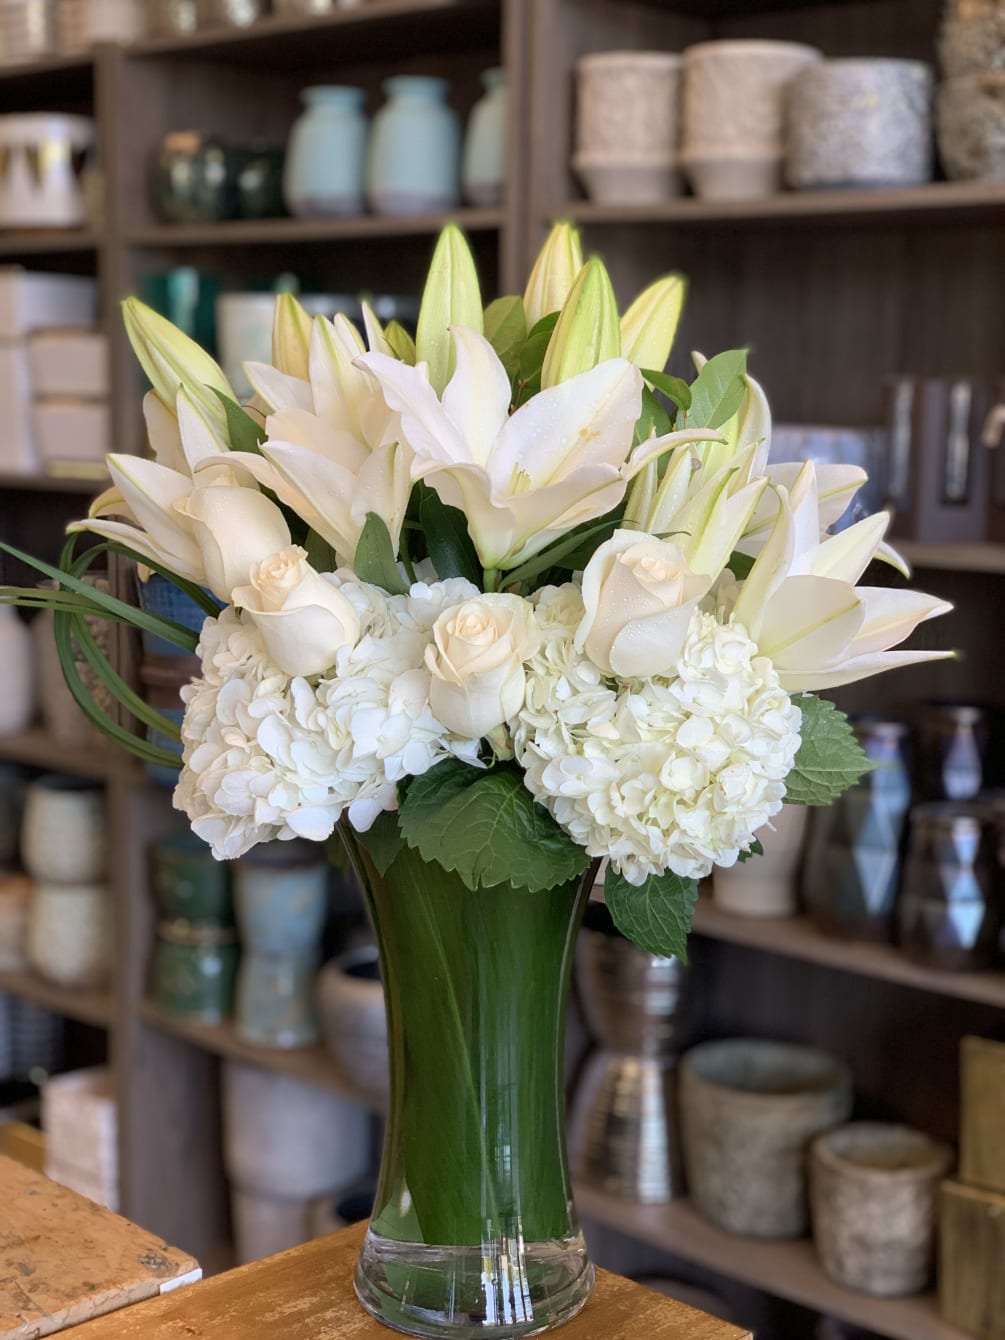 white lilies, roses, hydrangea giving it a modern style 